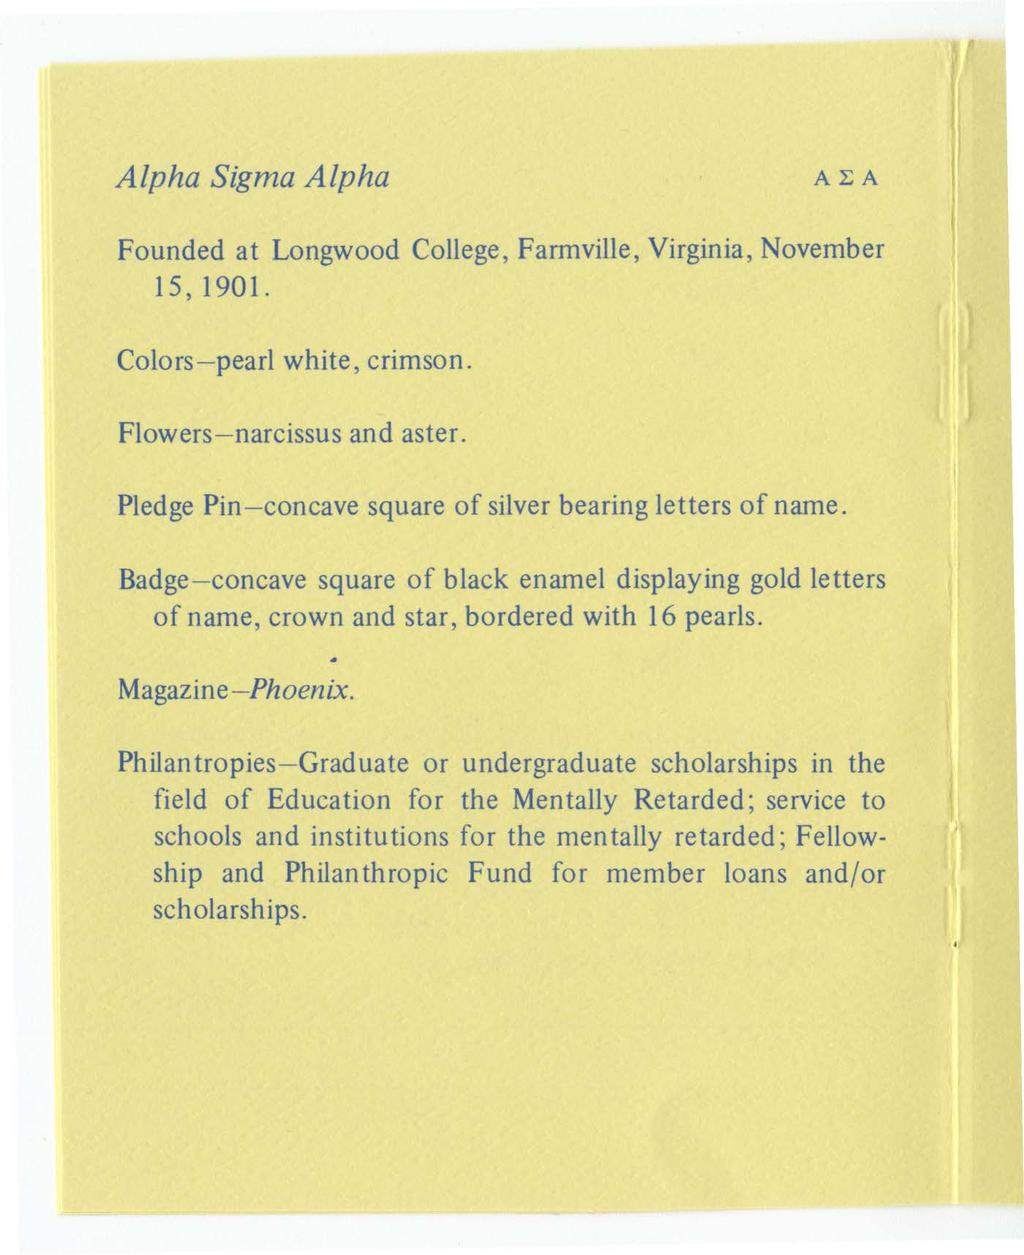 Alpha Sigma Alpha AEA Founded at Longwood College, Farmville, Virginia, November 1 S, 1901. Colors- pearl white, crimson. Flowers- narcissus and aster.